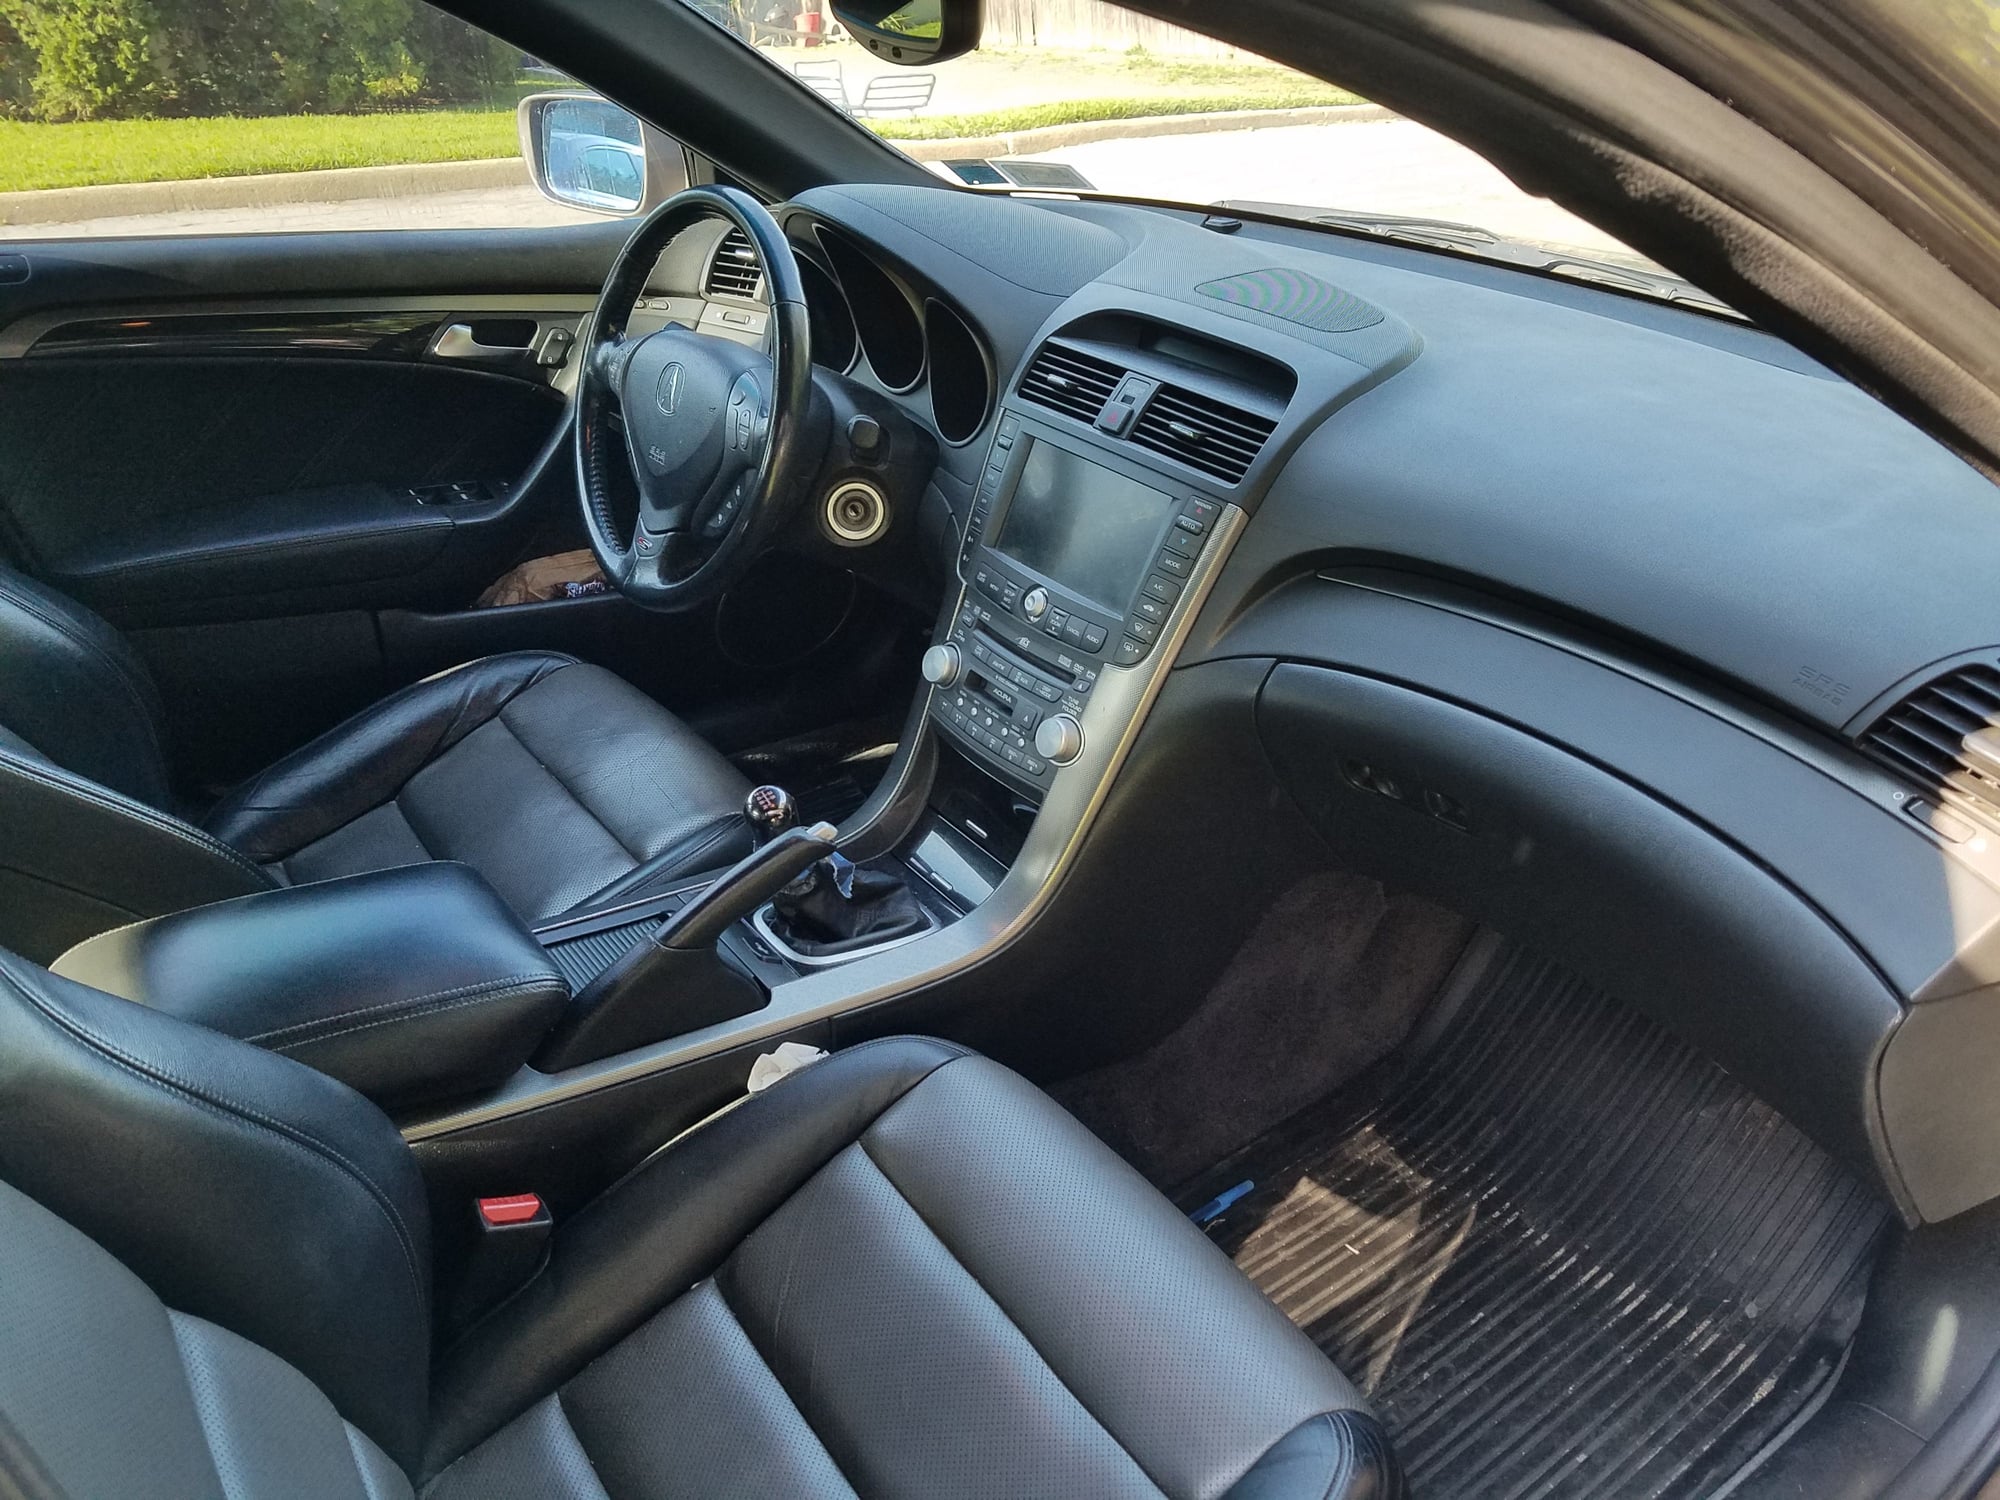 FS: 2007 Acura Tl Type S Manual Transmission Located in long island New